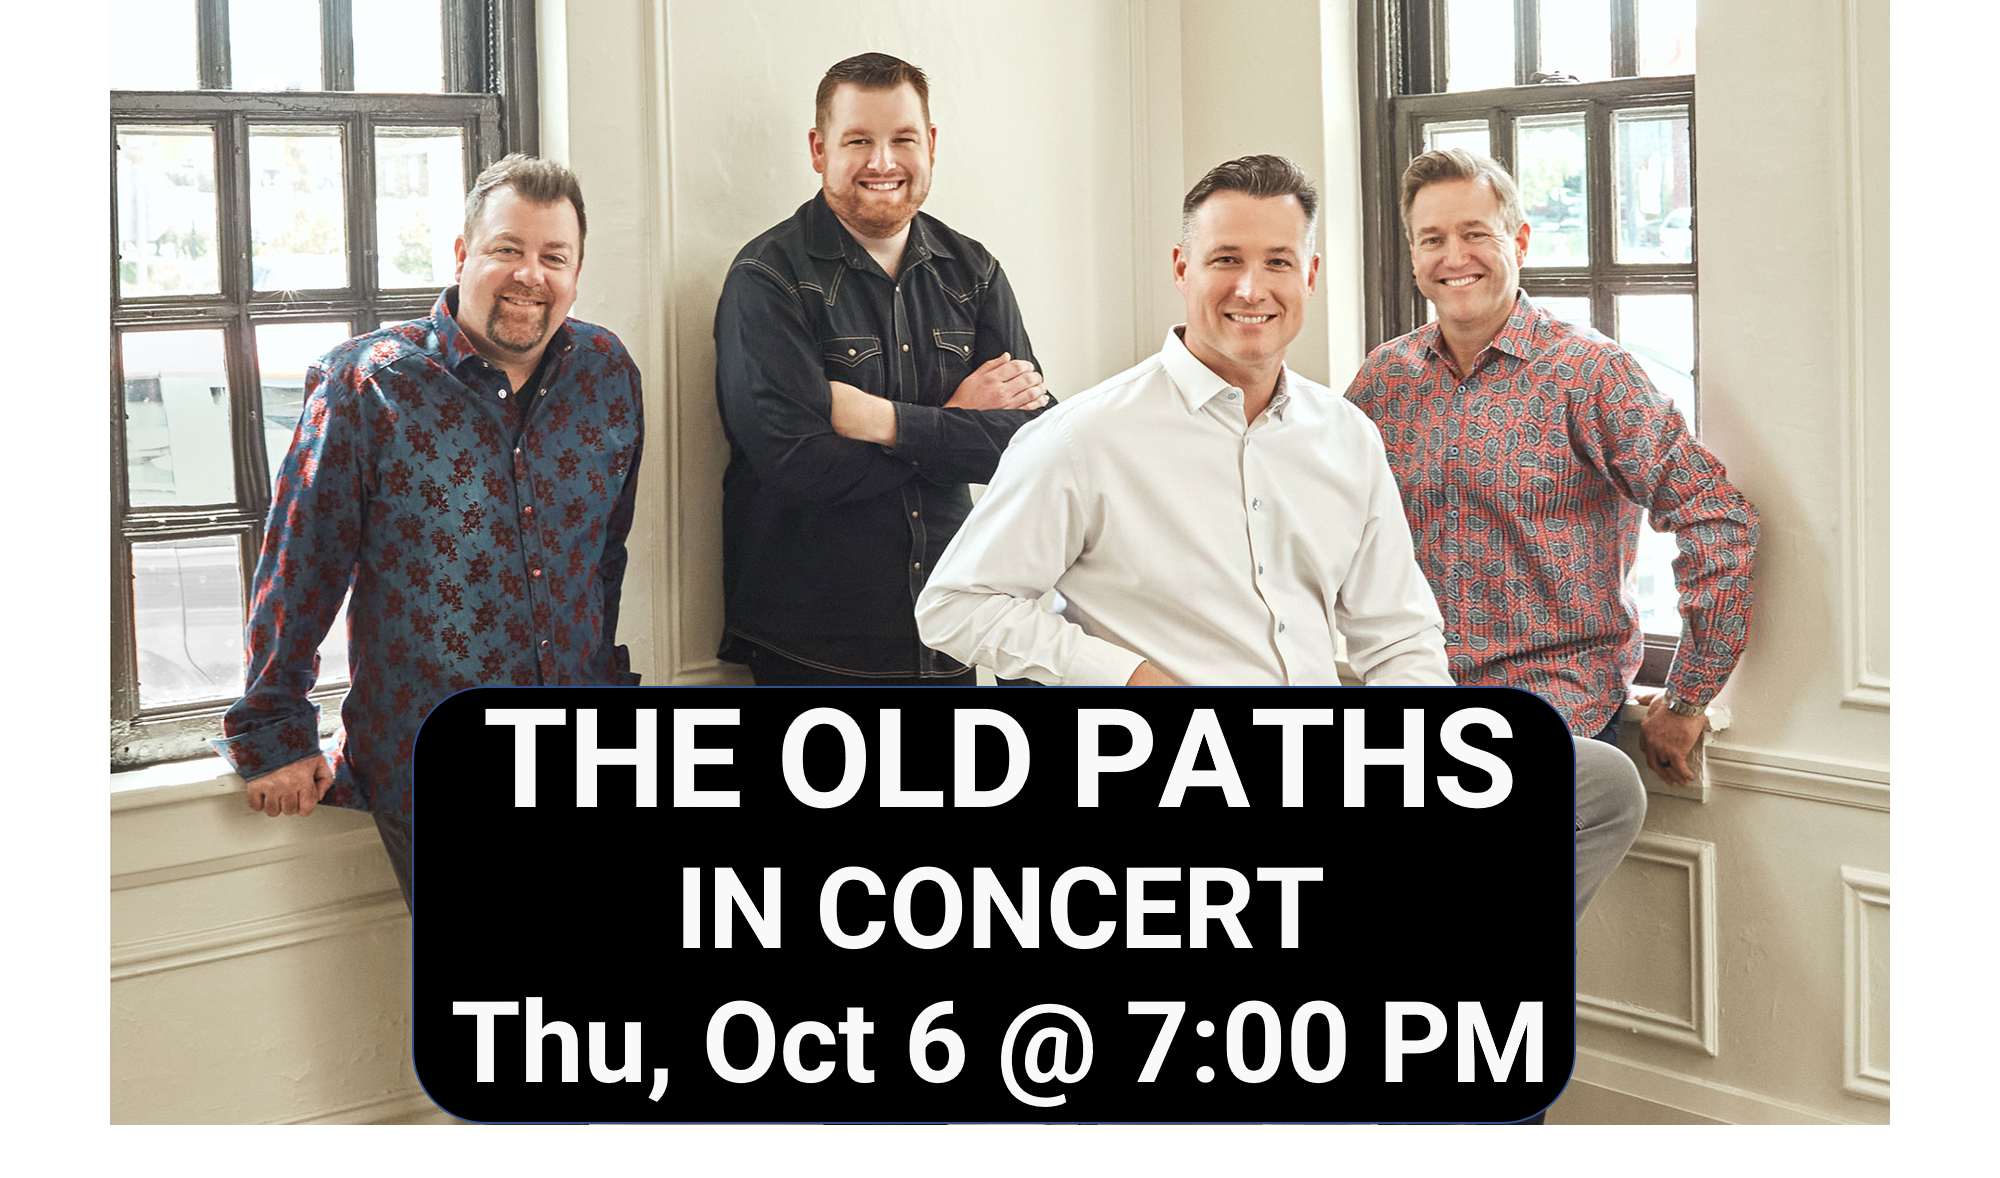 The Old Paths in concert October 6